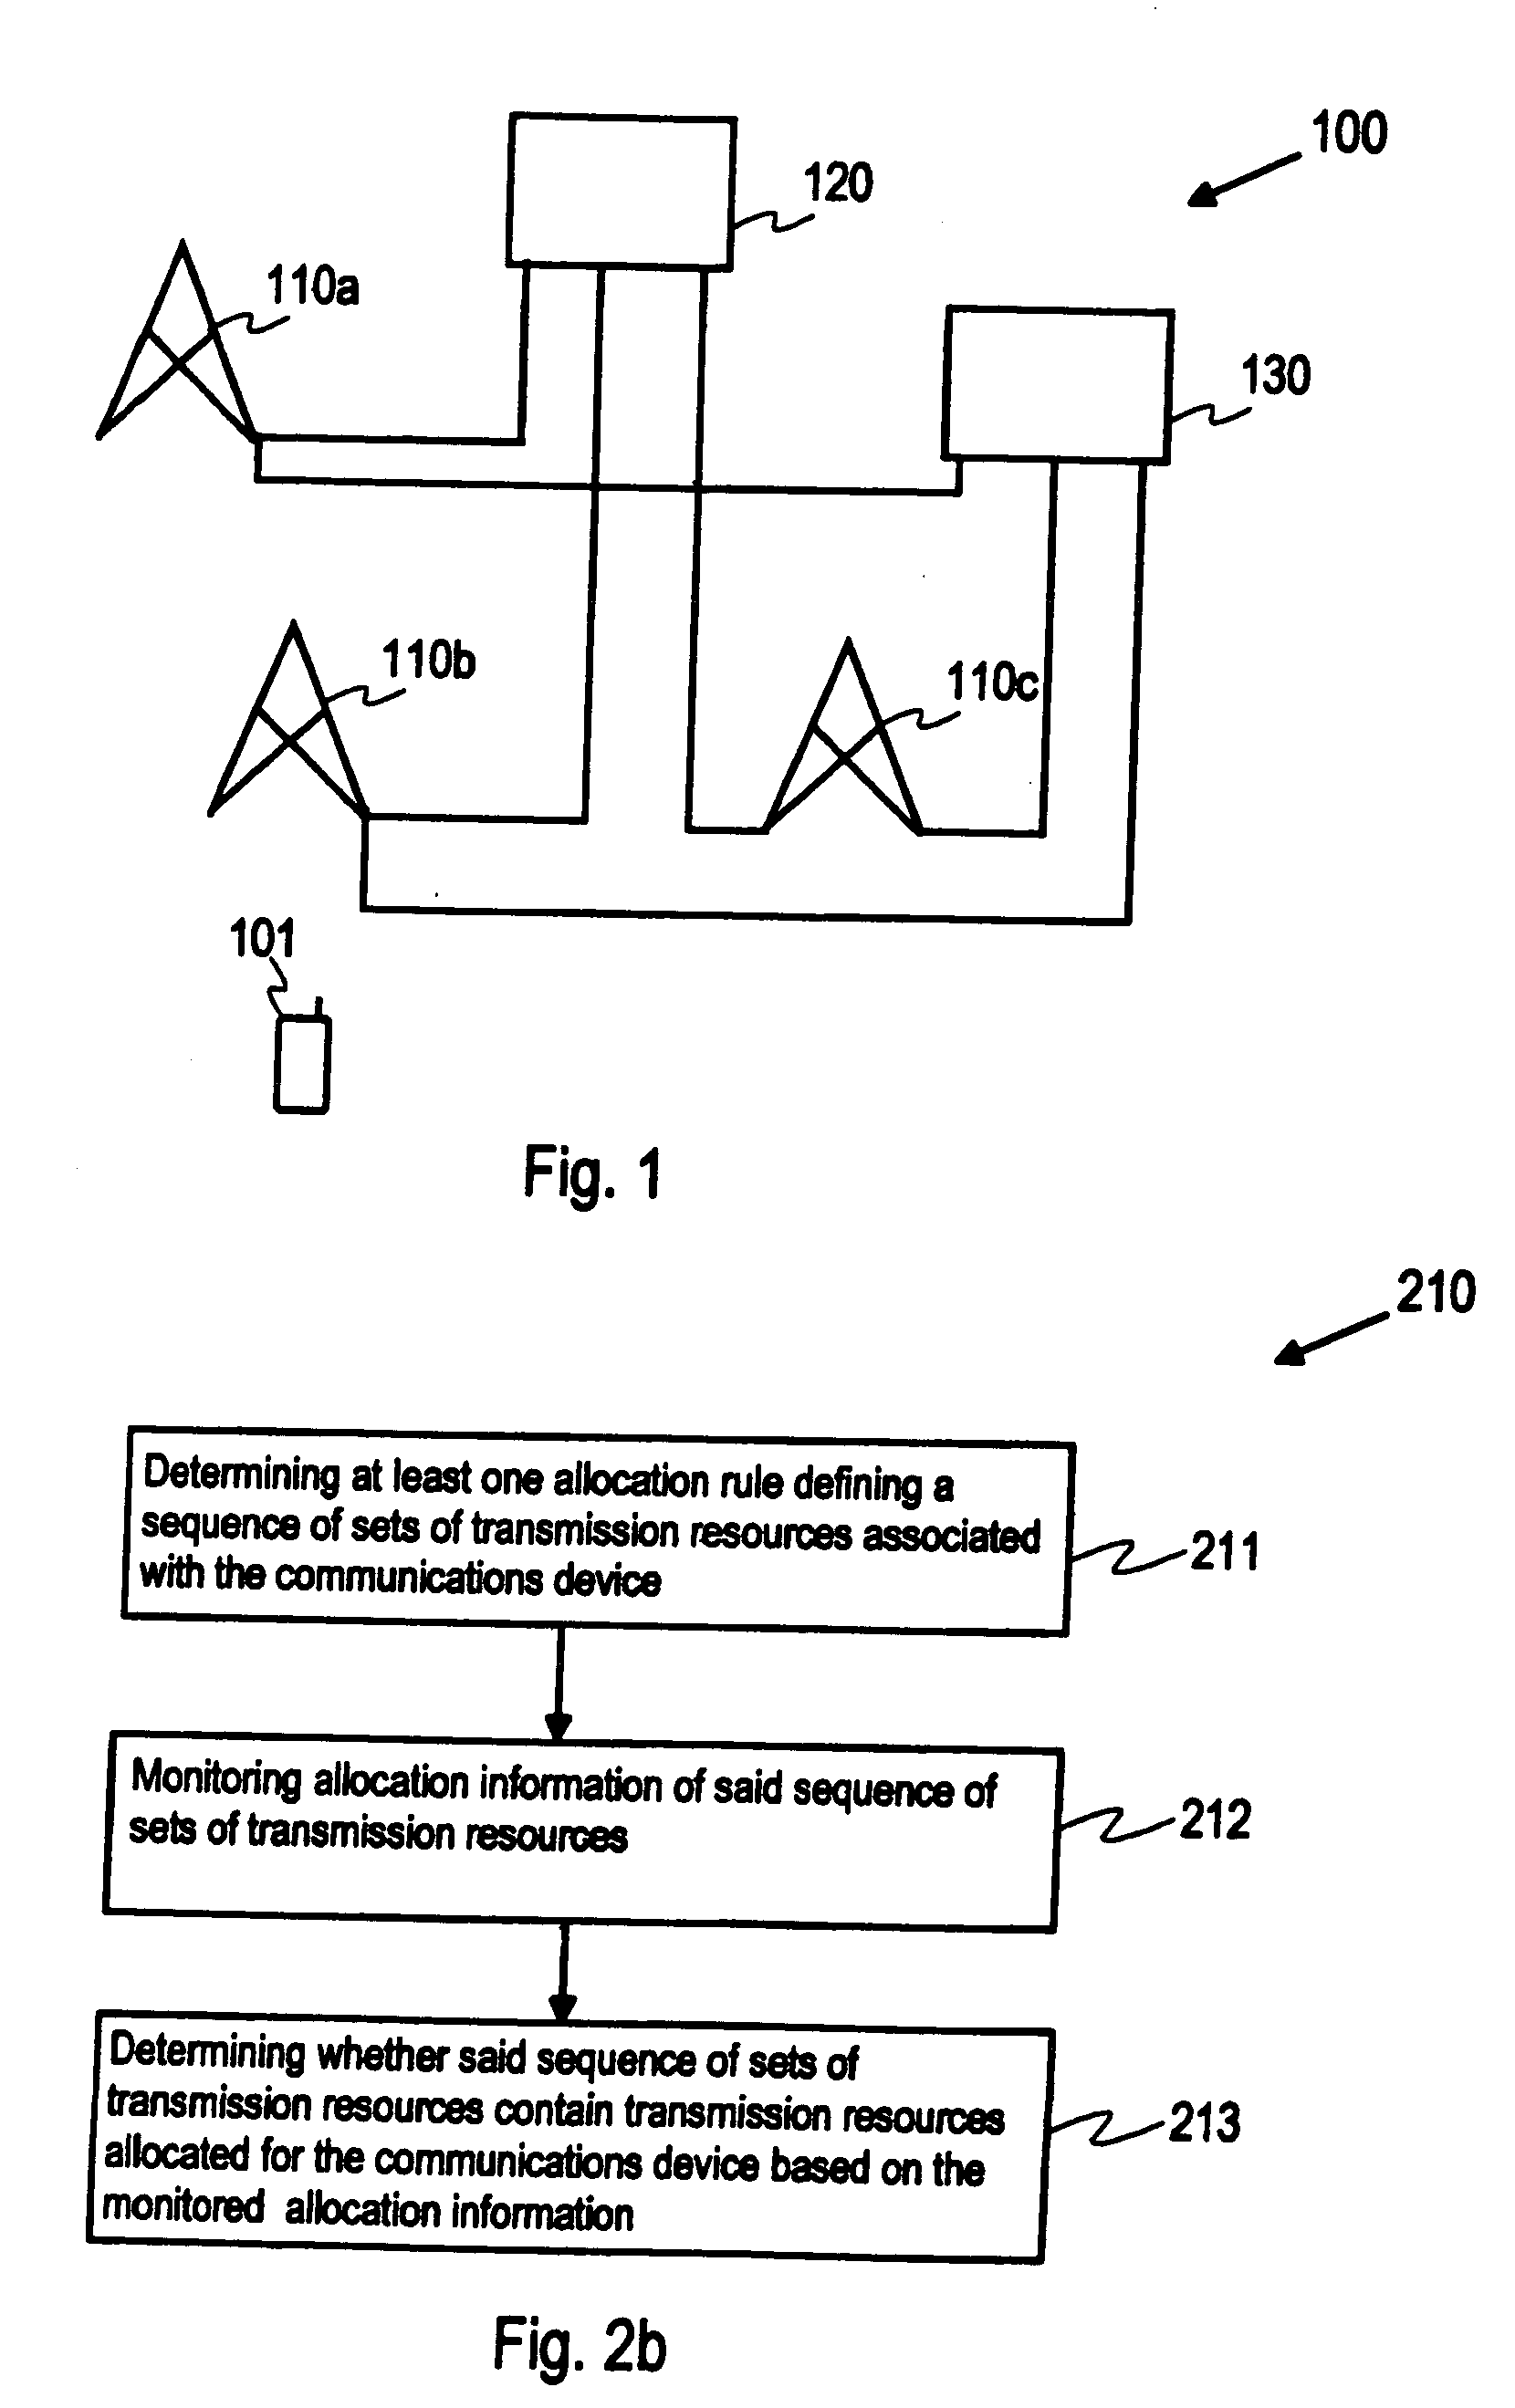 Discontinuous transmission/reception in a communications system